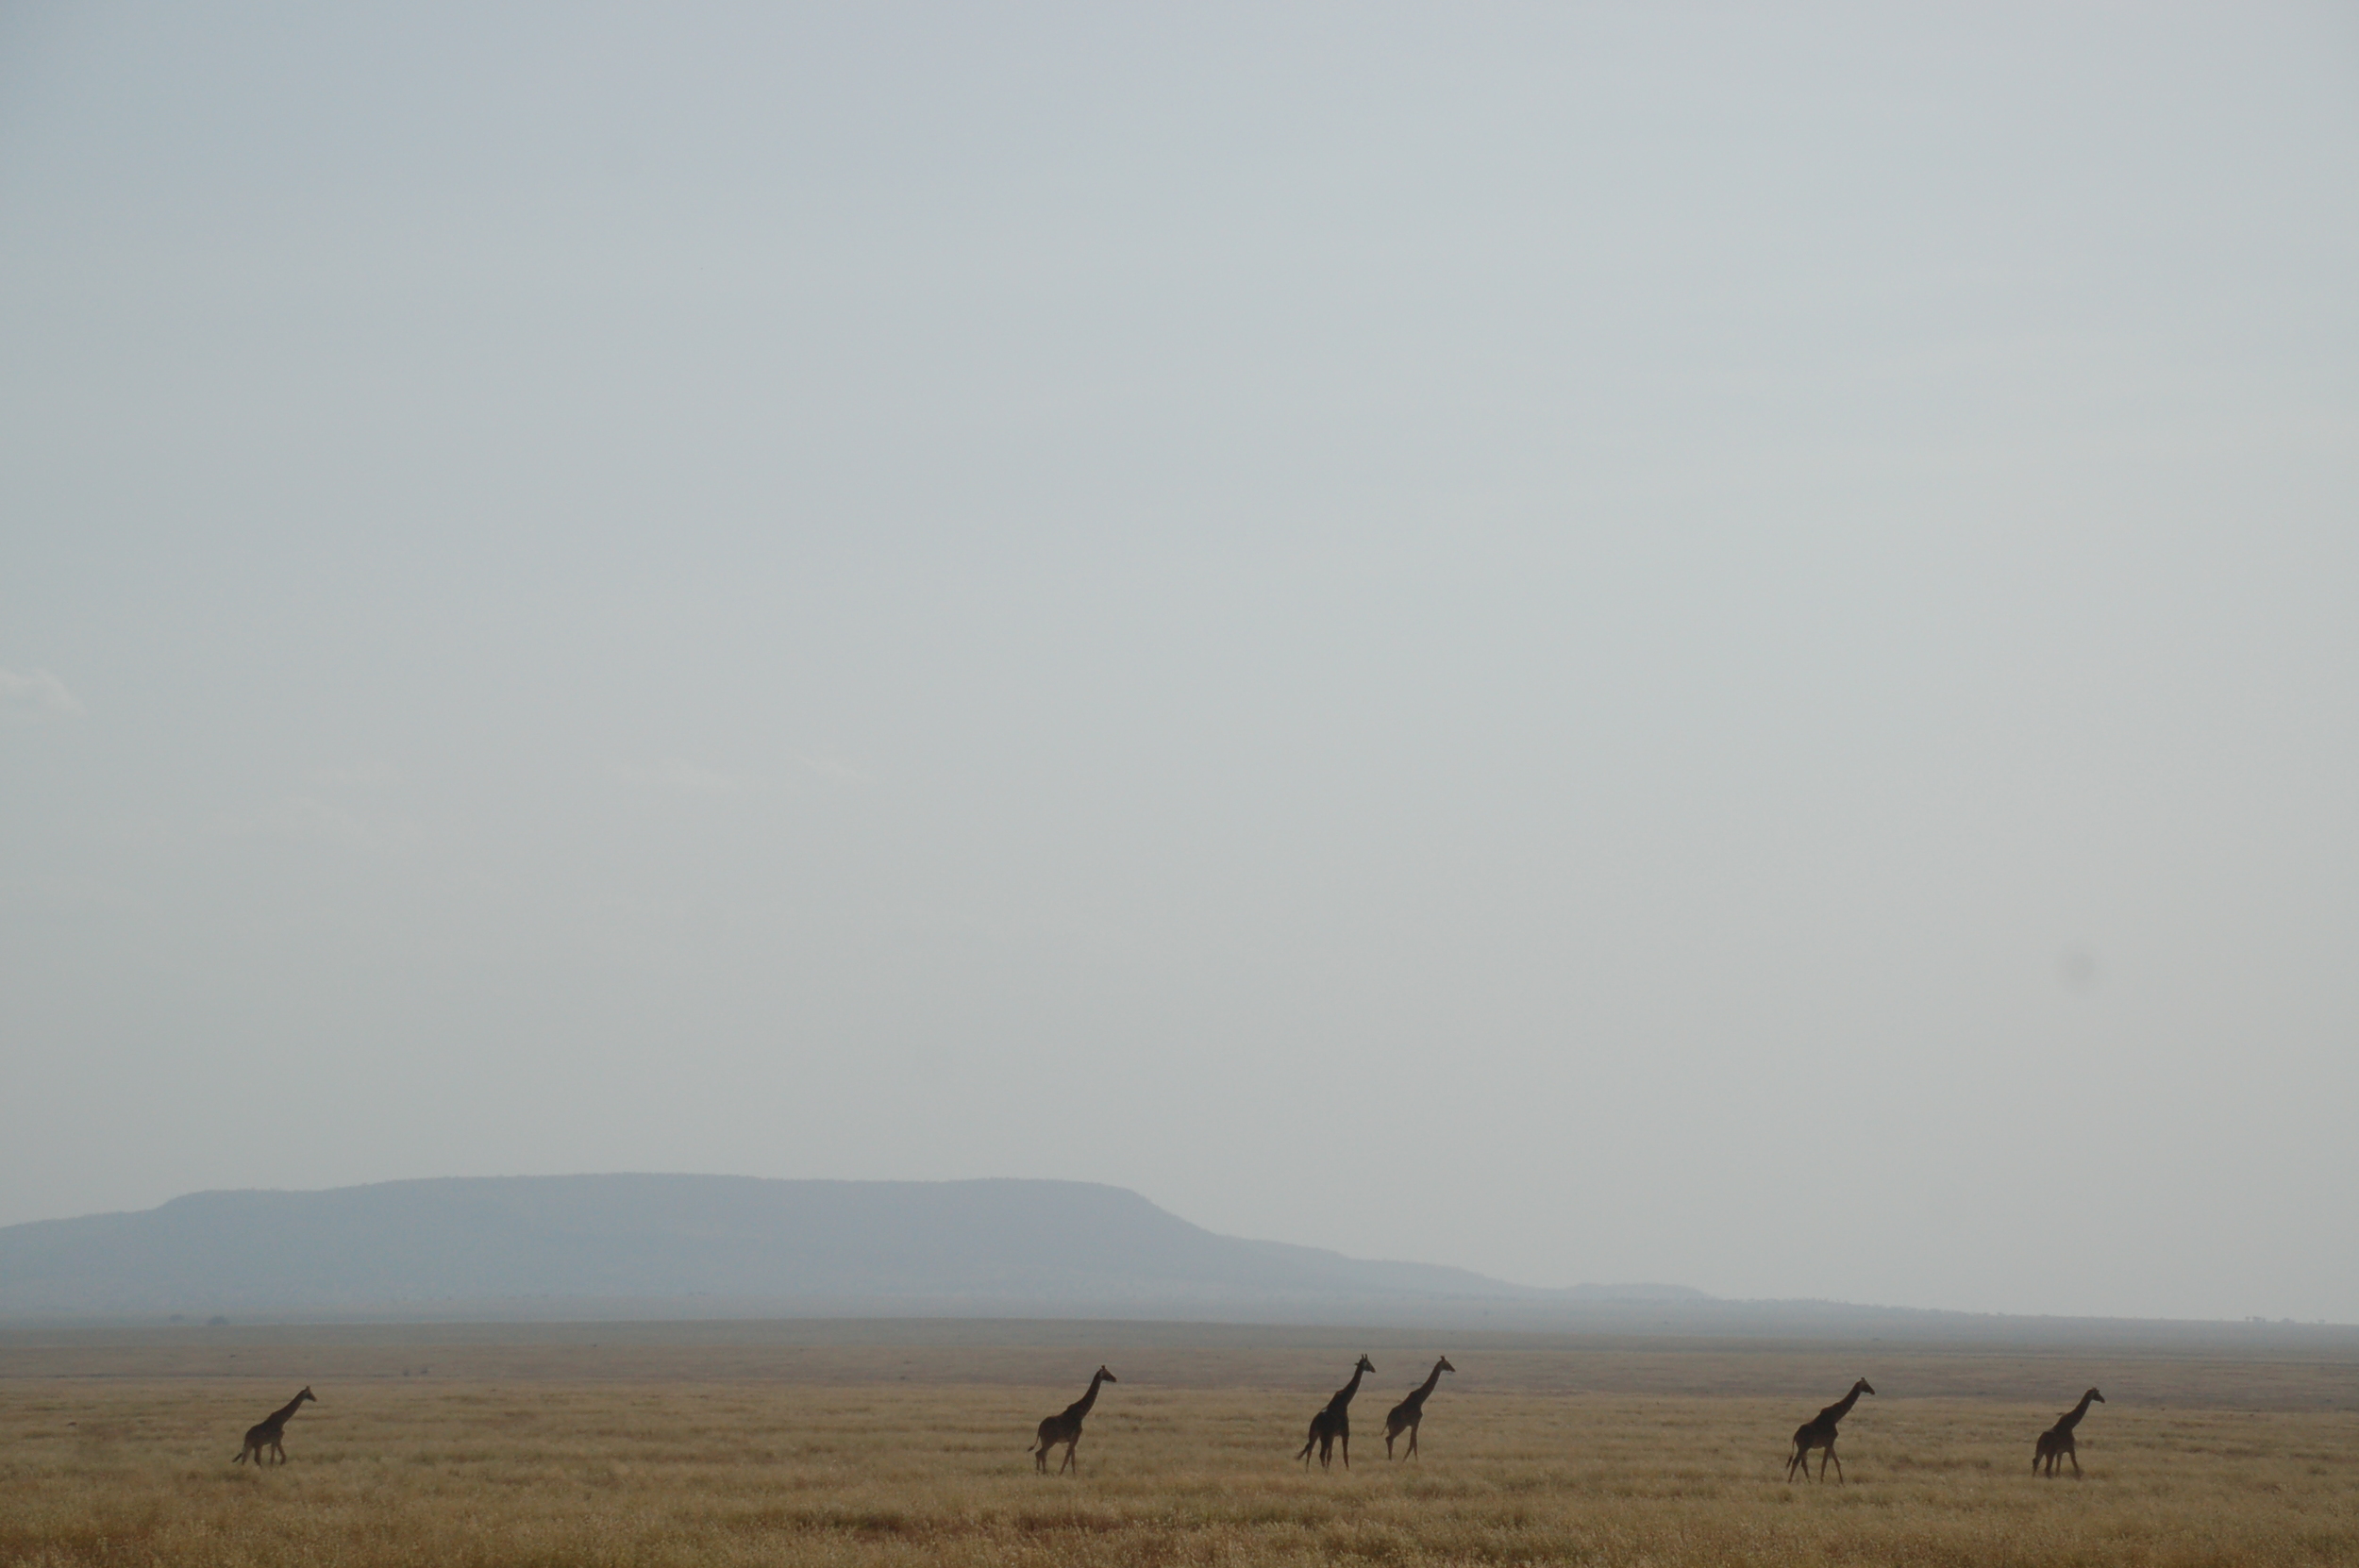 Giraffes and the open land